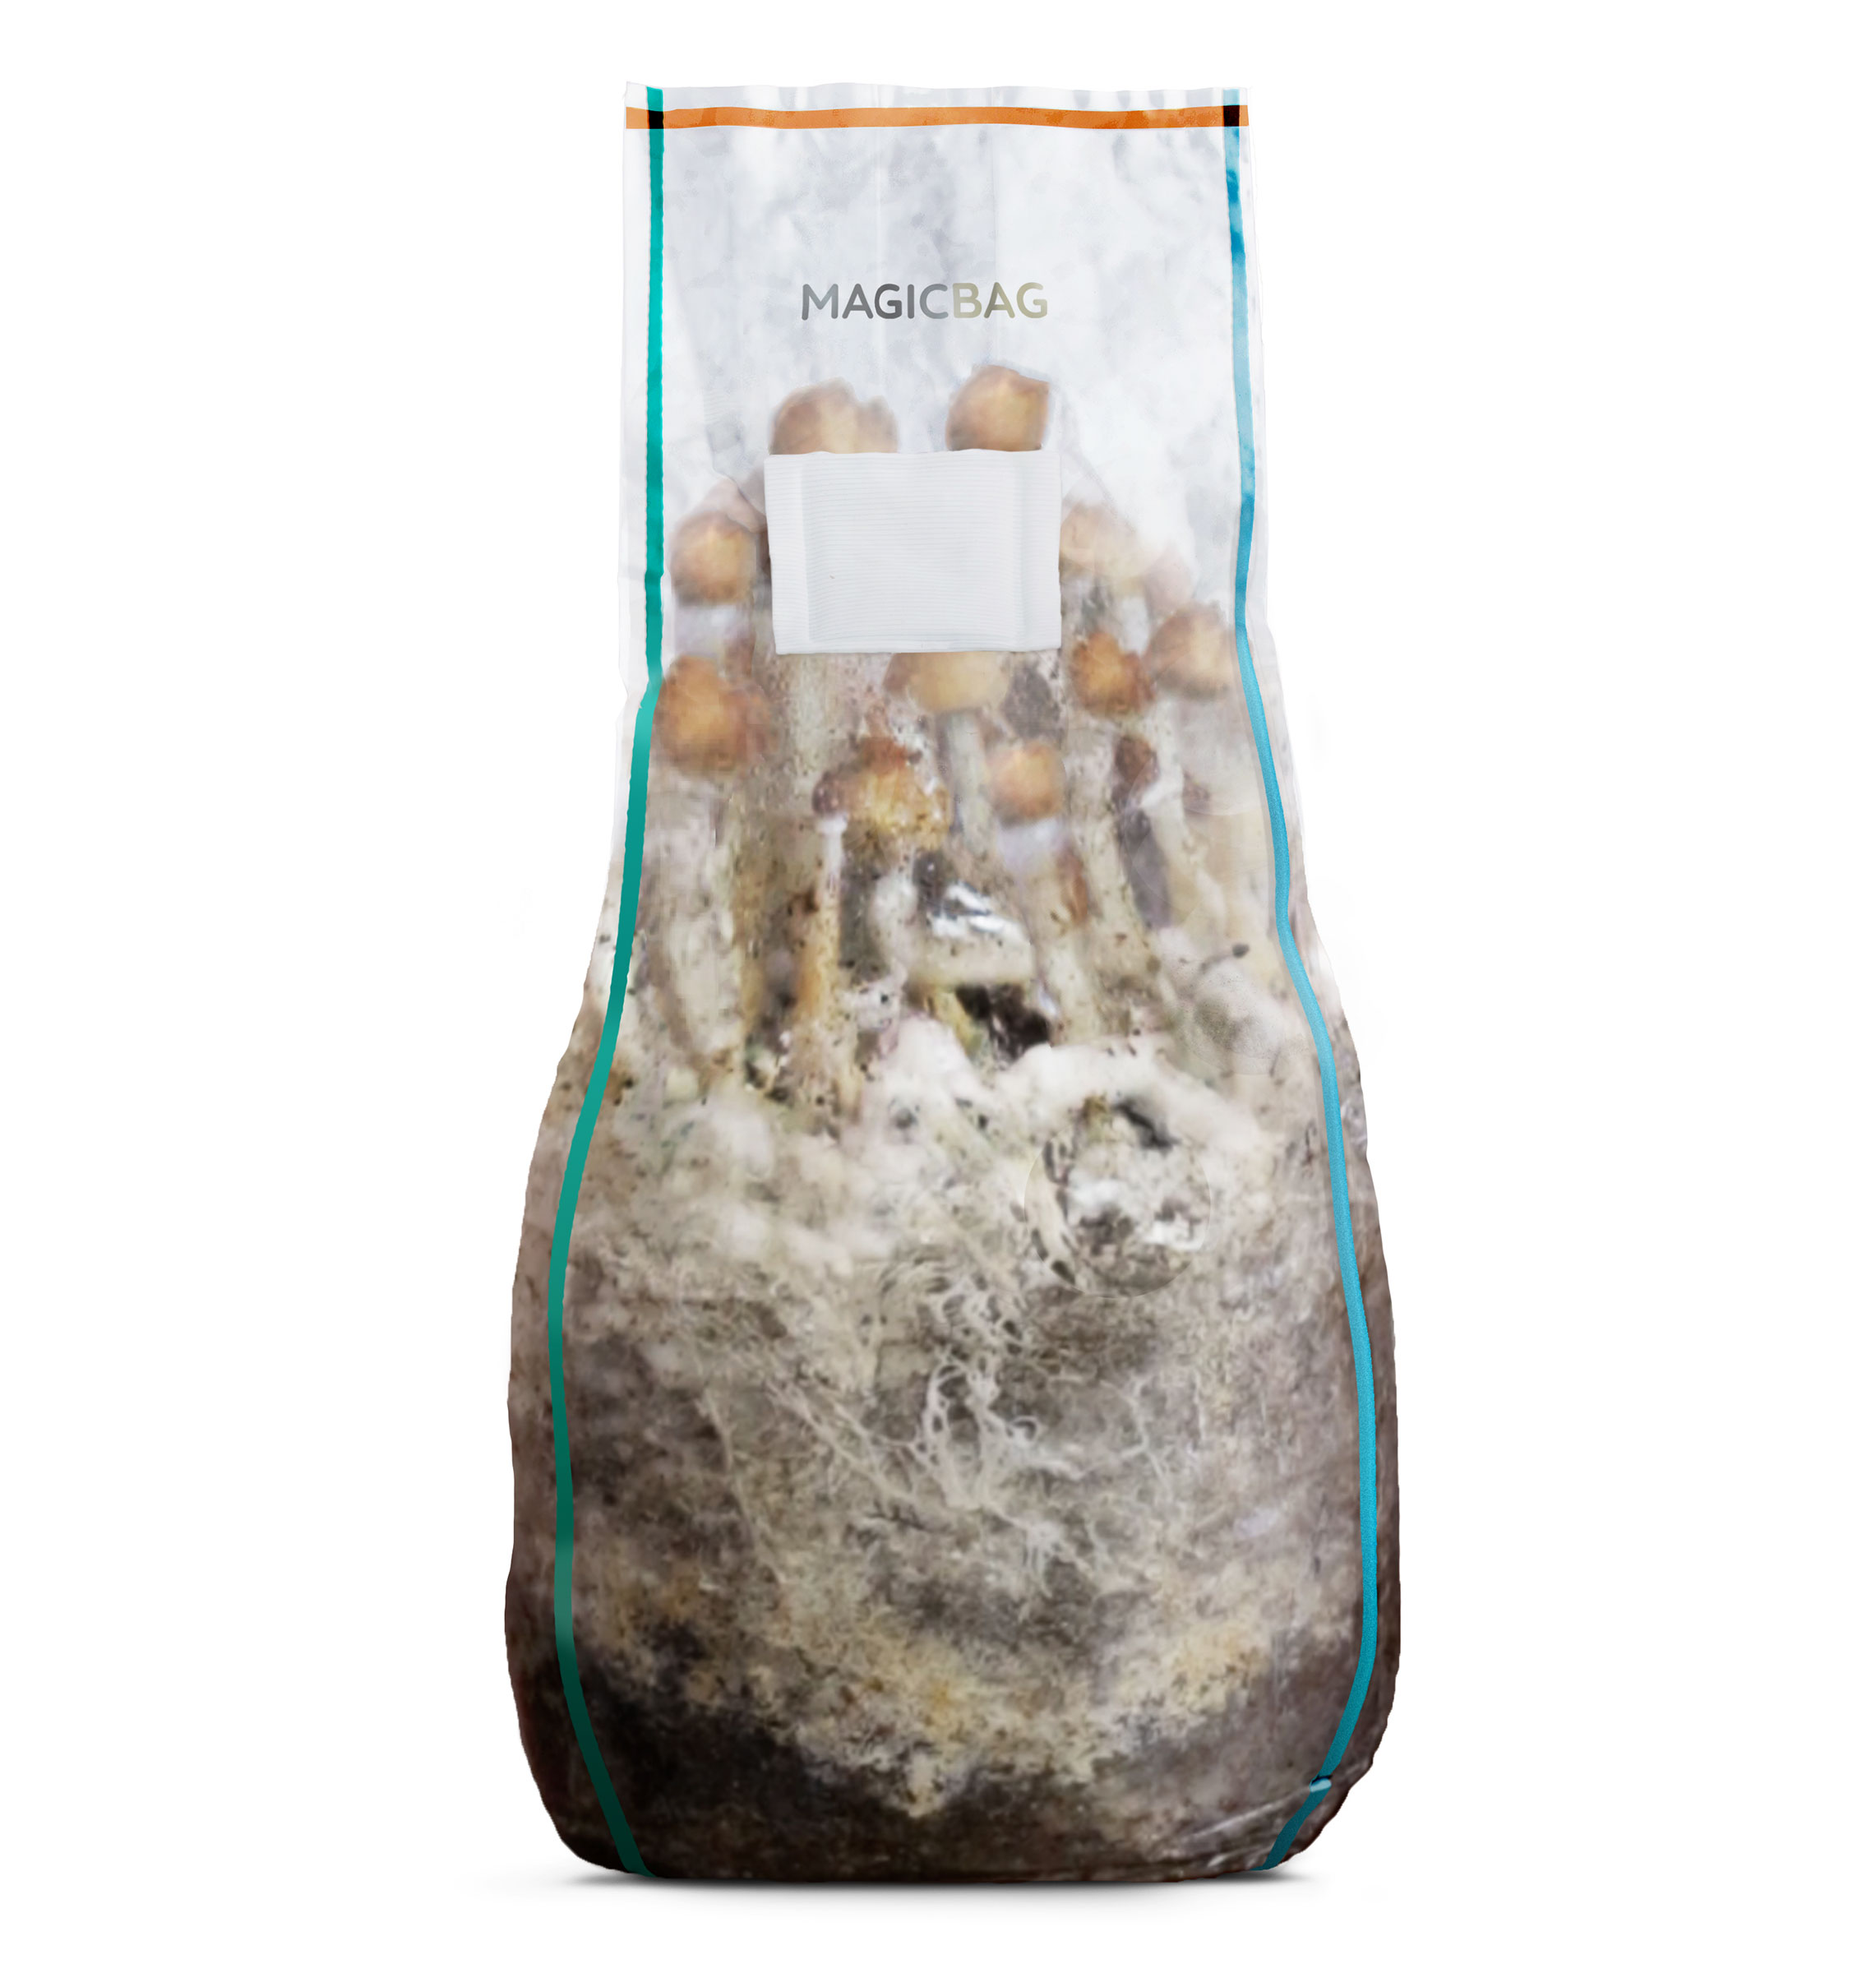  Booming Acres, The Magical 5lb All-in-One Mushroom Grow Bag, Mushroom Grow Kit, Harvest Your own Happiness